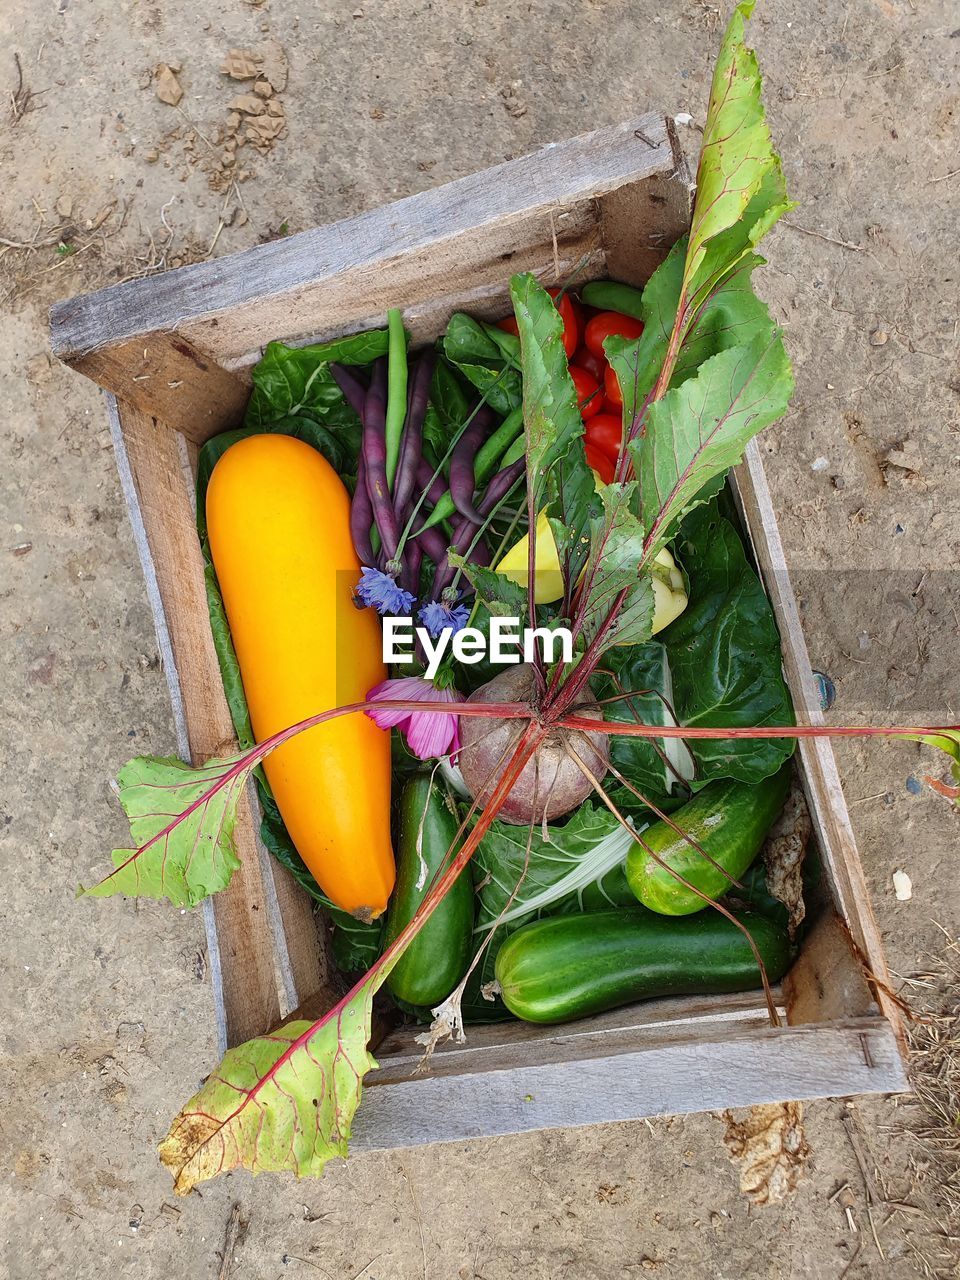 HIGH ANGLE VIEW OF VEGETABLES IN CONTAINER ON GREEN GRILL